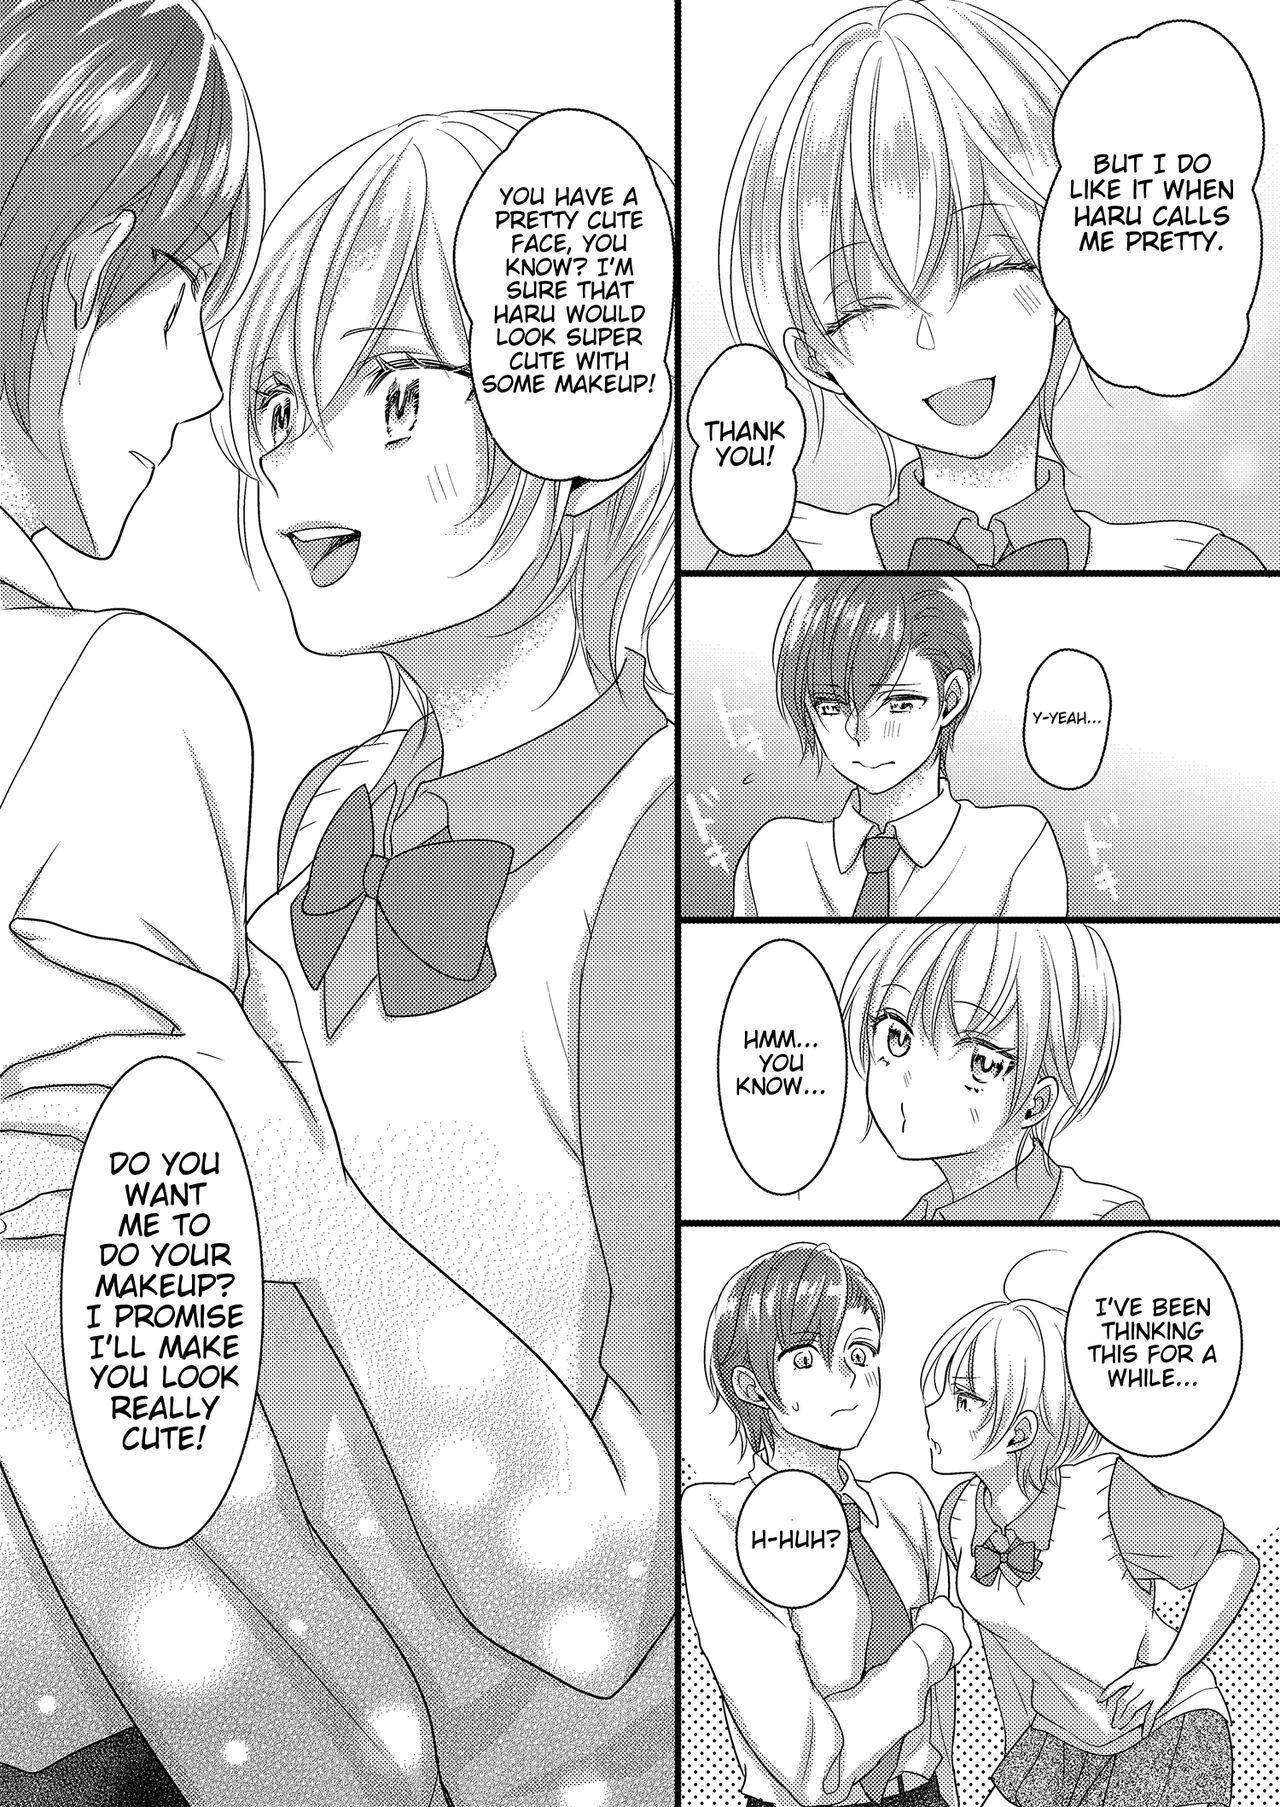 Perverted Haru and Sana ～Love Connected Through Cosplay～ - Original Culo - Page 7